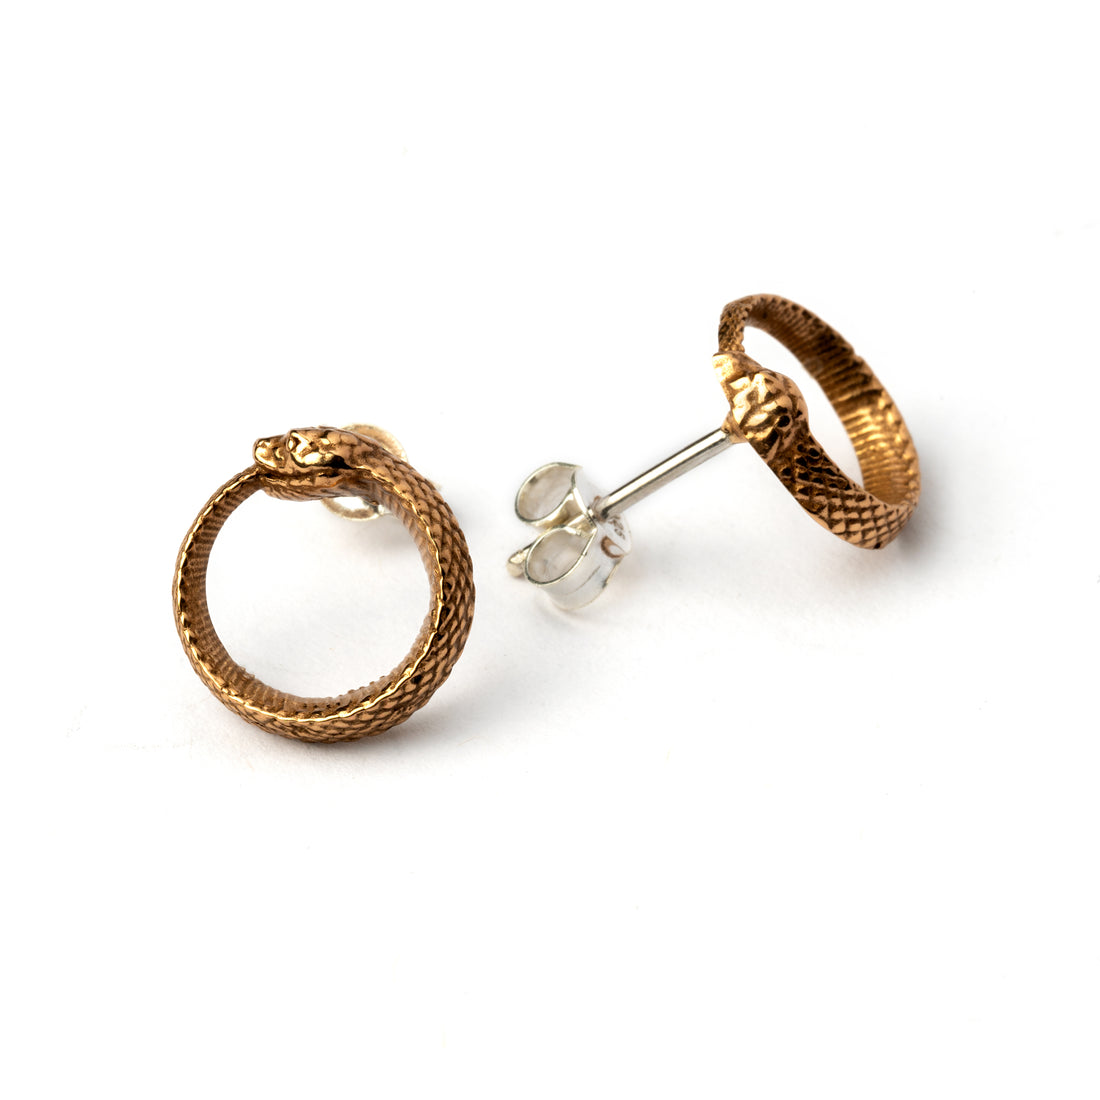 Ouroboros snake Bronze Ear Studs front and back view